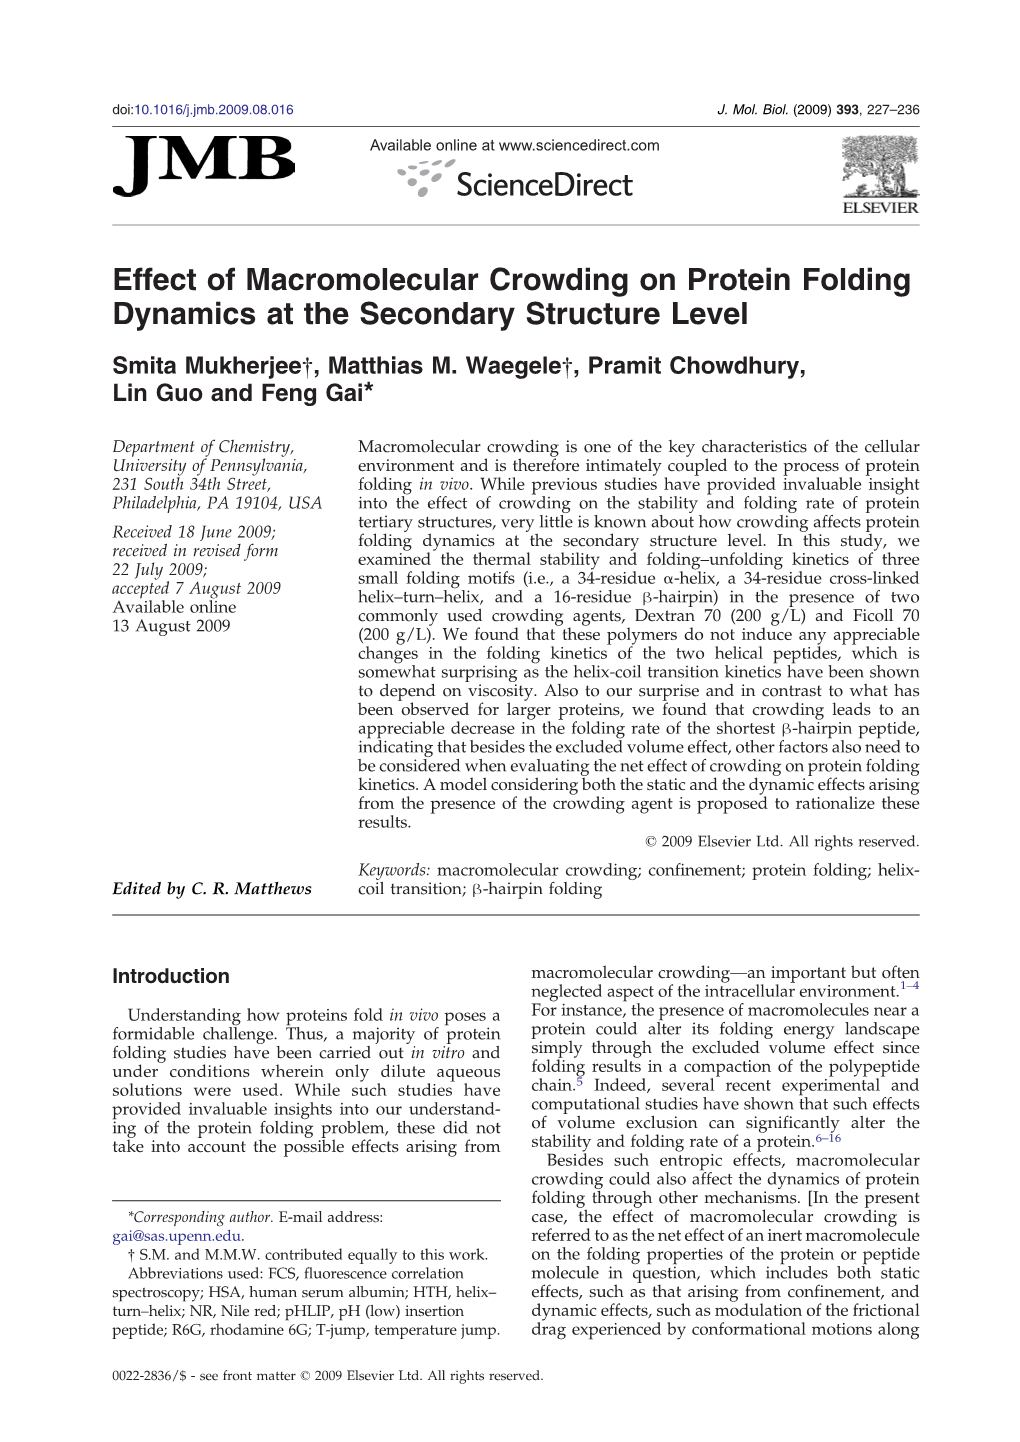 Effect of Macromolecular Crowding on Protein Folding Dynamics at the Secondary Structure Level